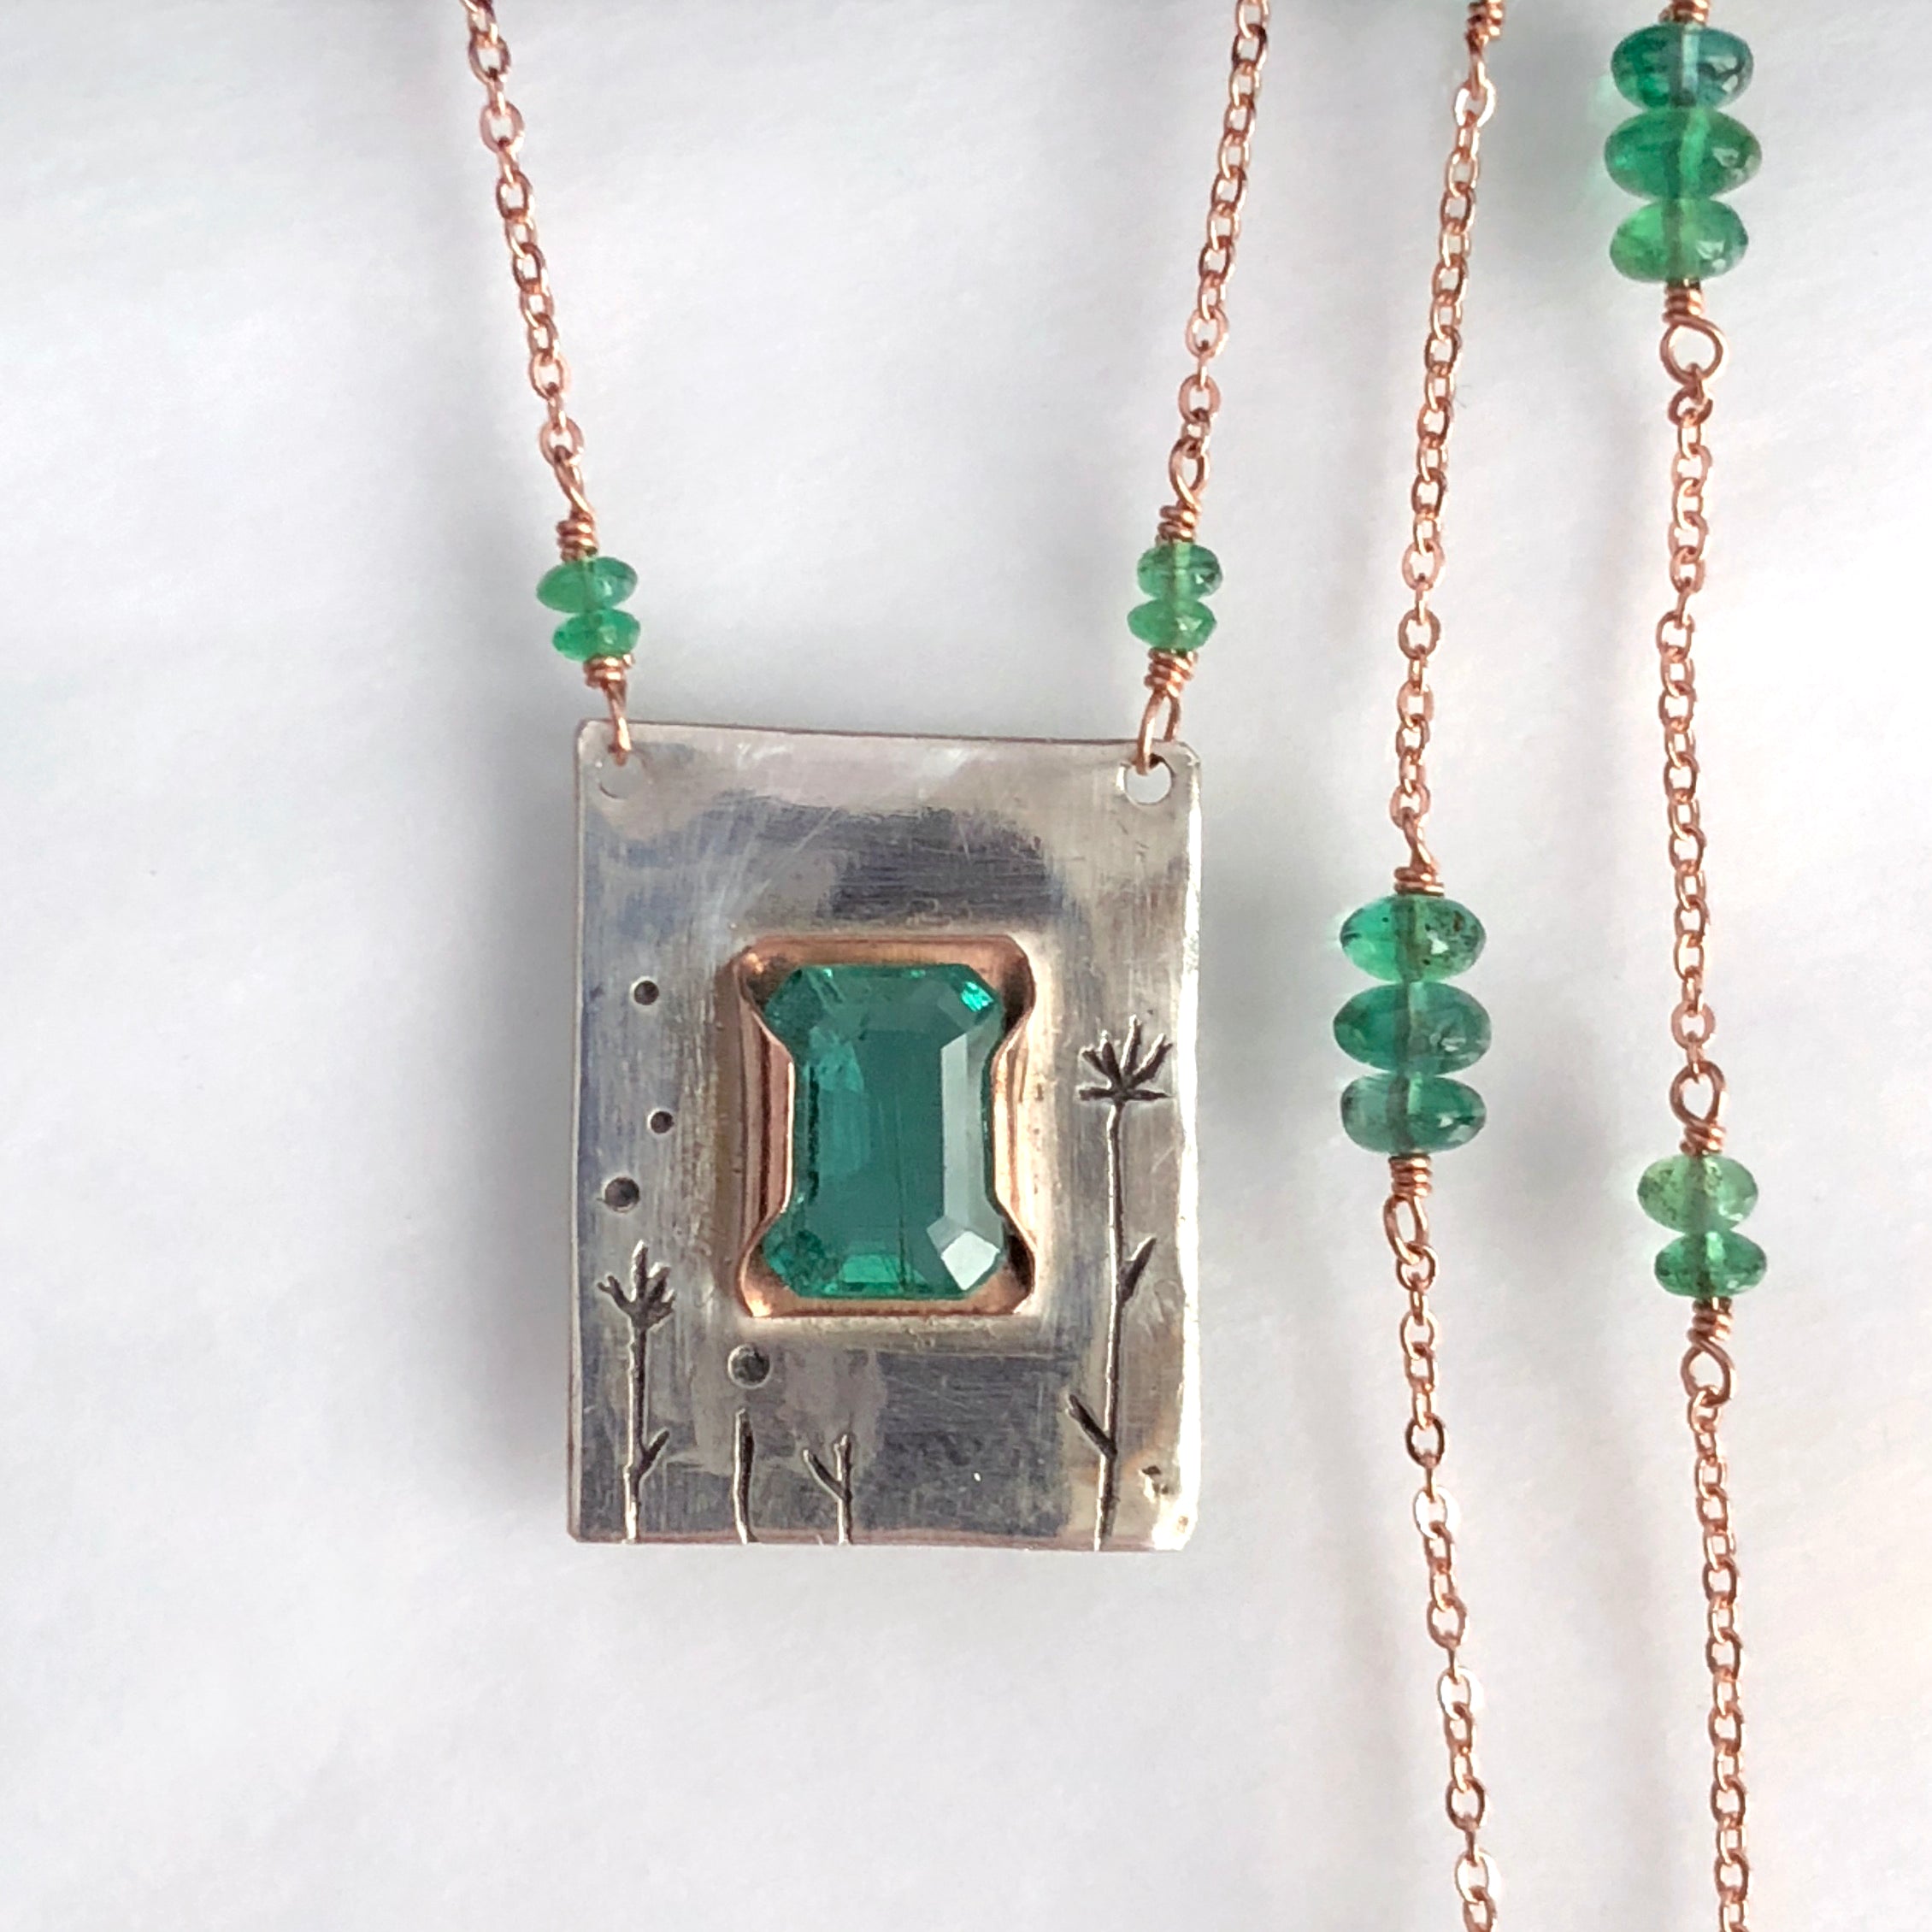 14K Emerald Necklace, Hand Etched Necklace, May Birthstone, Solid Gold Silver